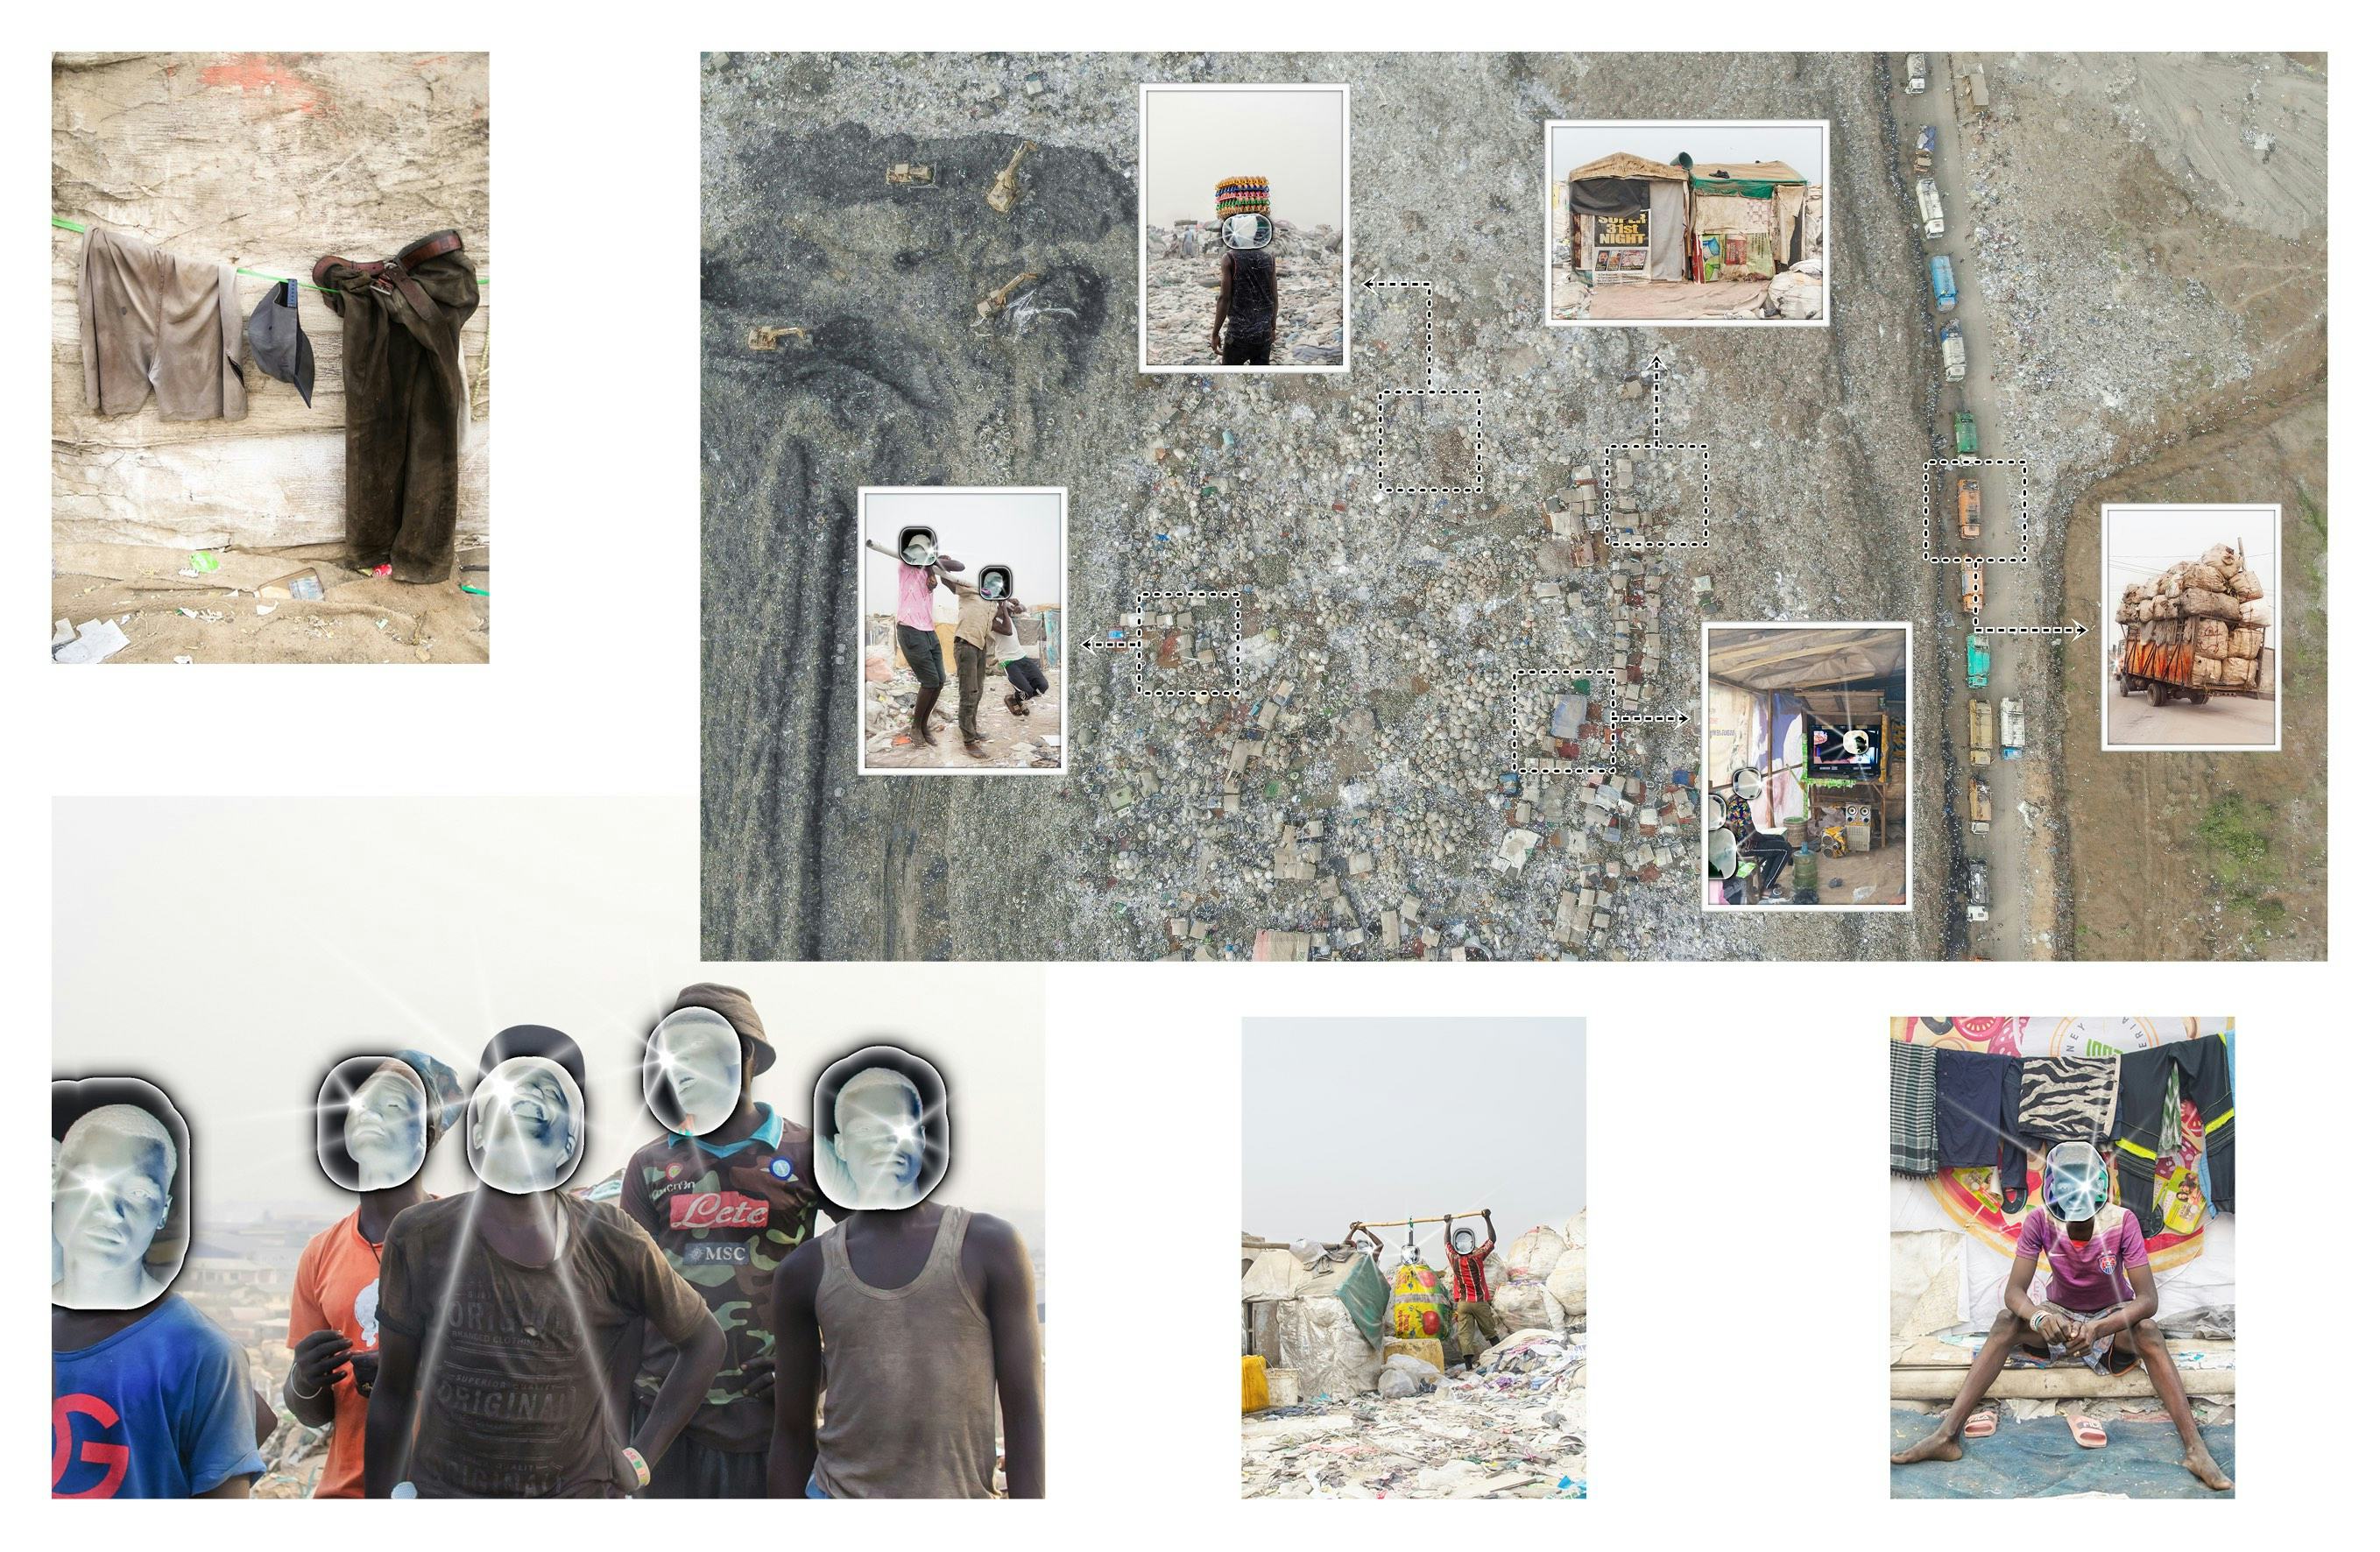 Spread from Foam Magazine #64: EXTREMES–The Environmental Issue, showing work by Aàdesokan